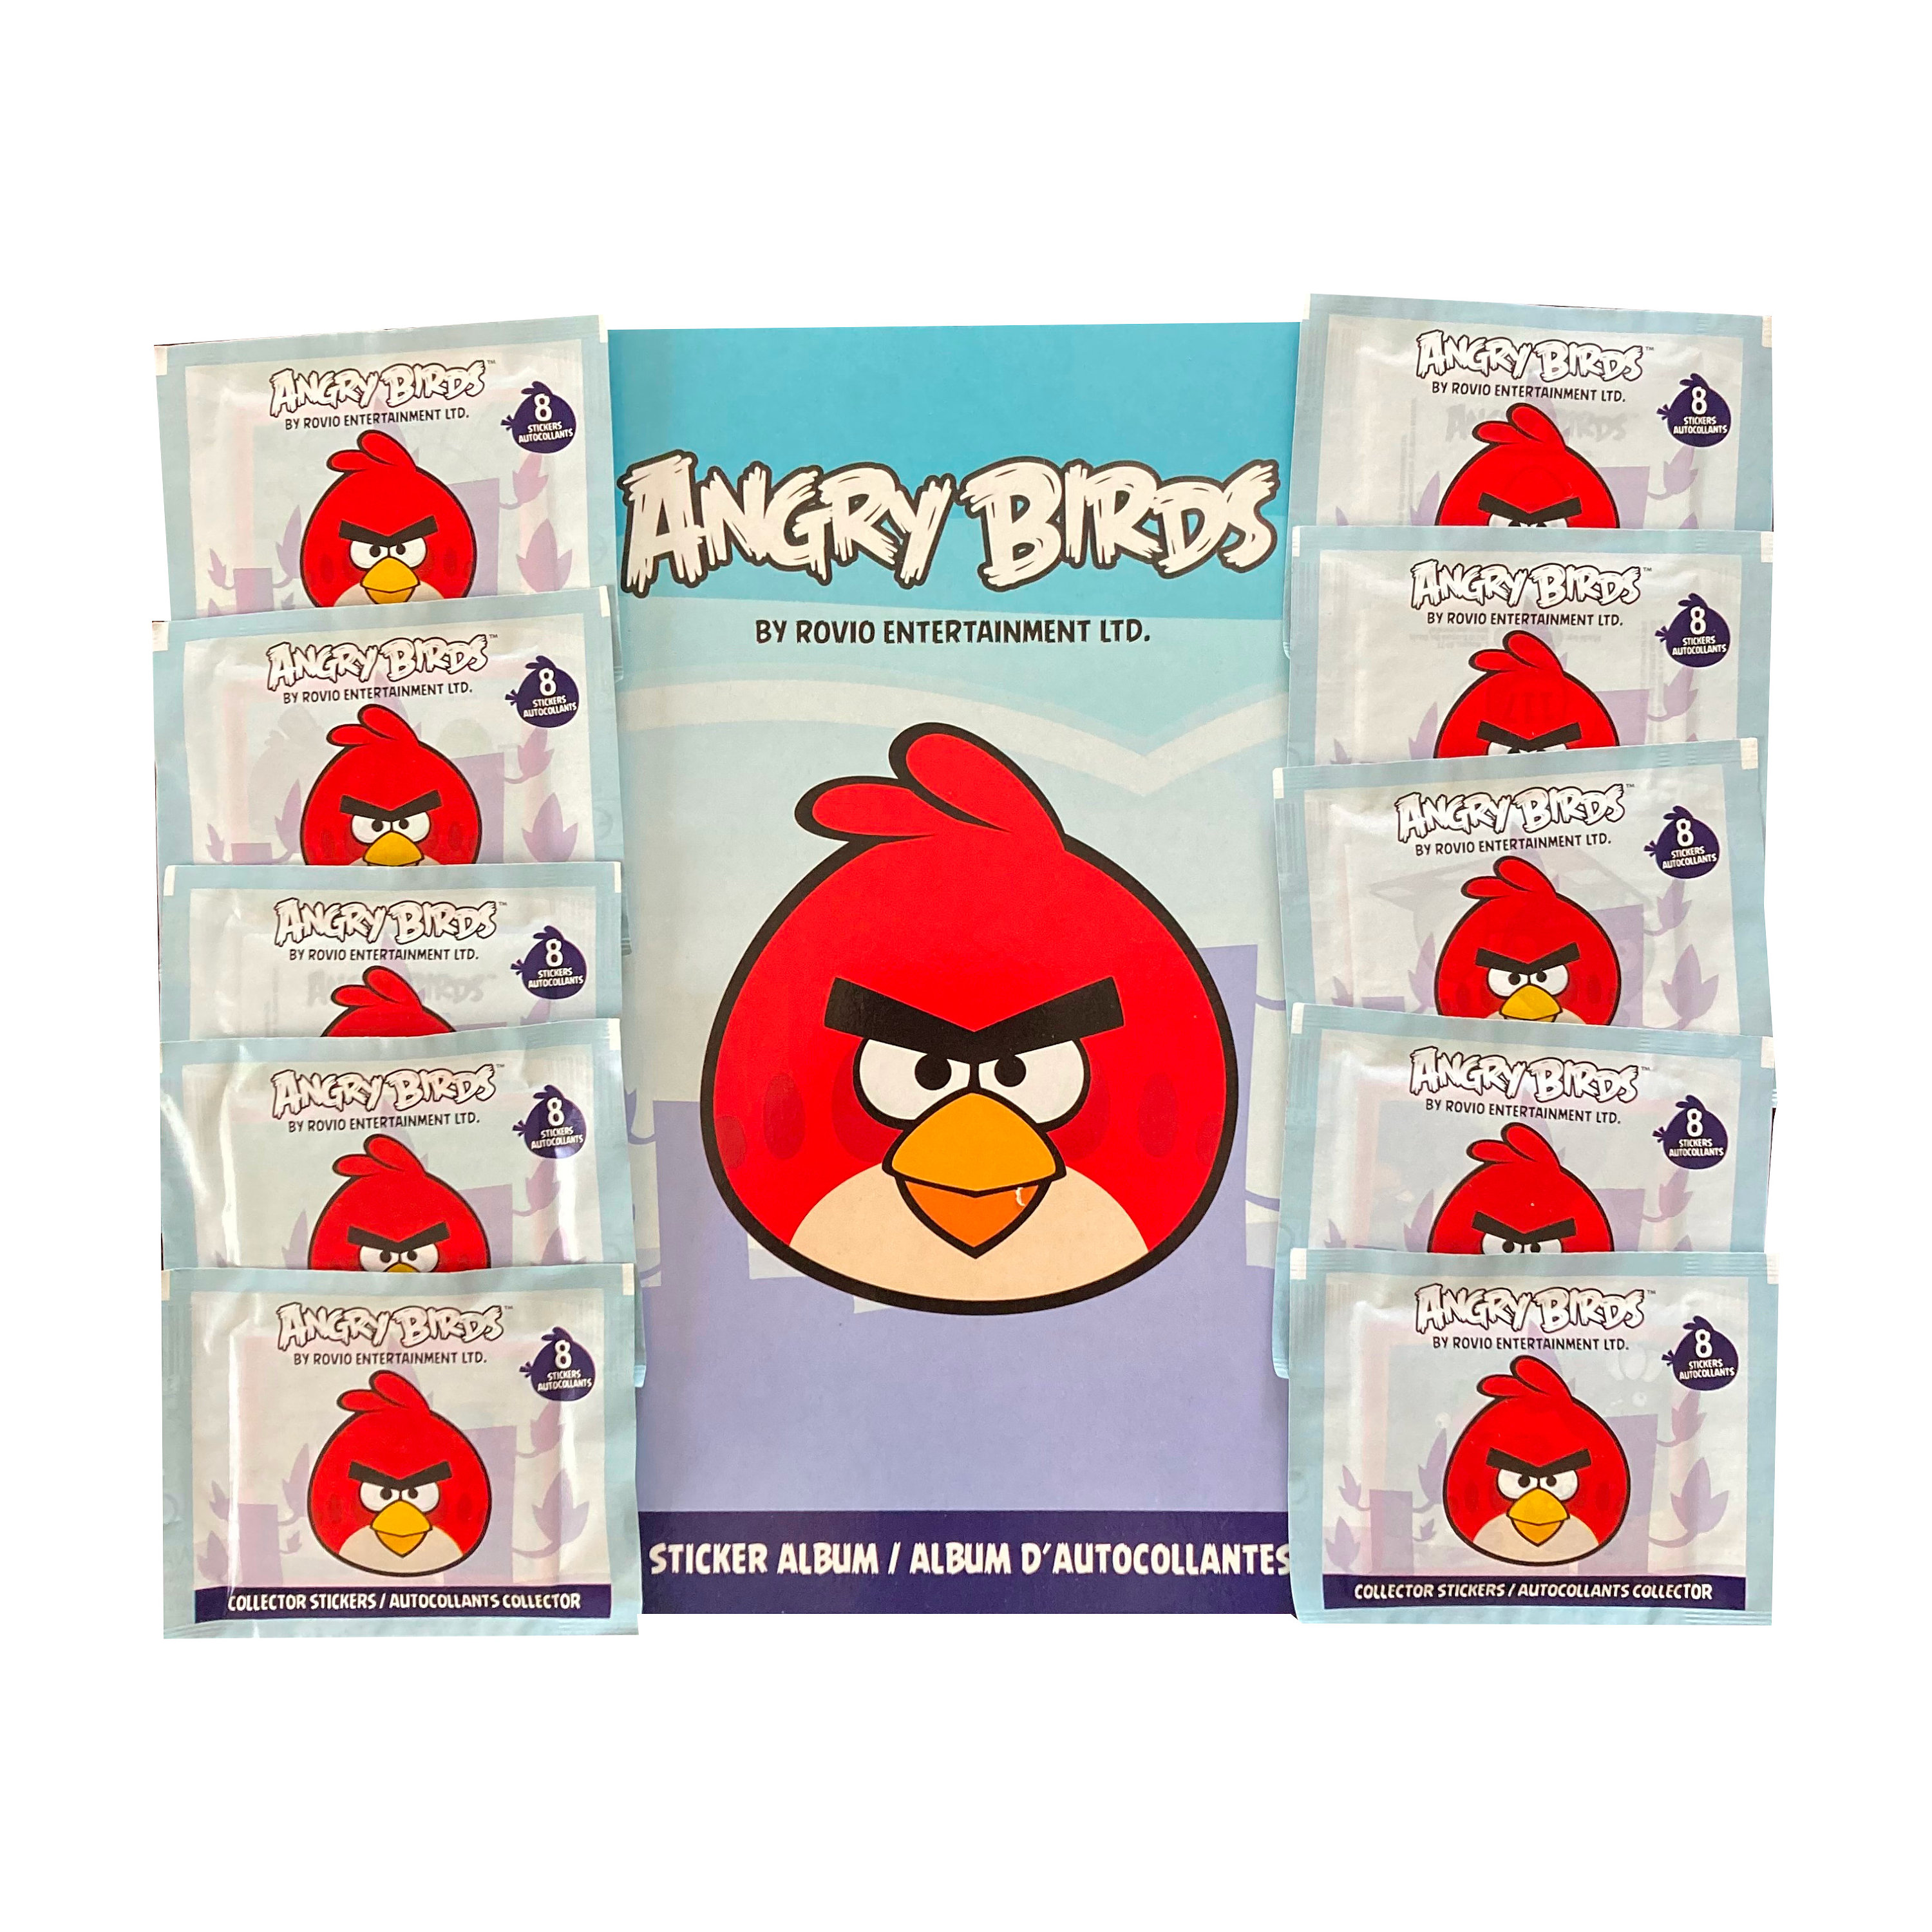 Dapperheid paraplu Politie Angry Birds Sticker Album With 10 Packages of Stickers. Each - Etsy